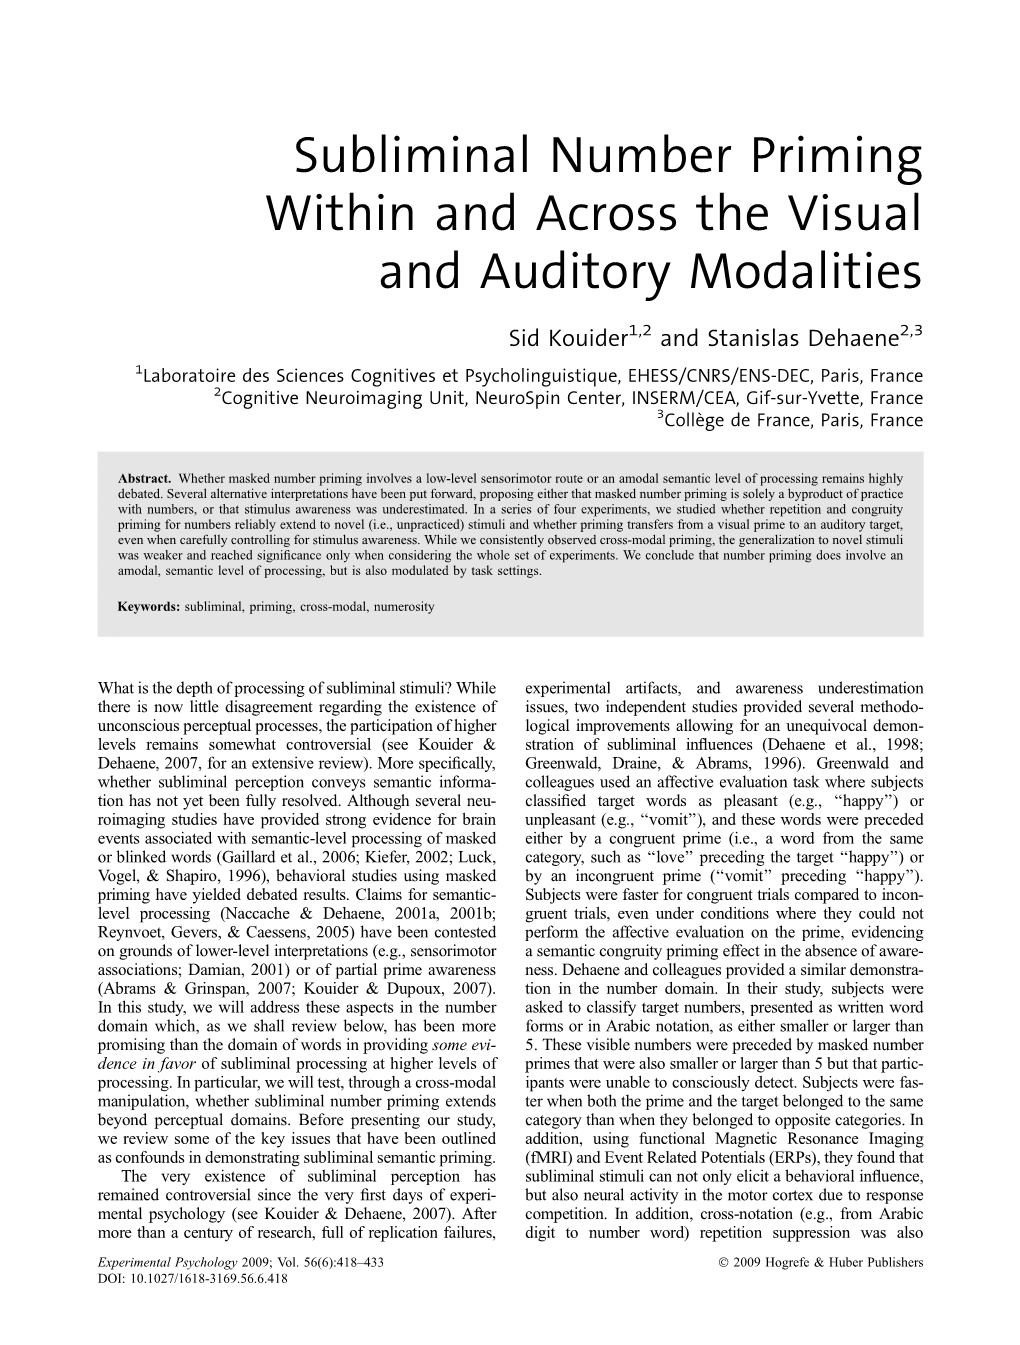 Subliminal Number Priming Within and Across the Visual and Auditory Modalities